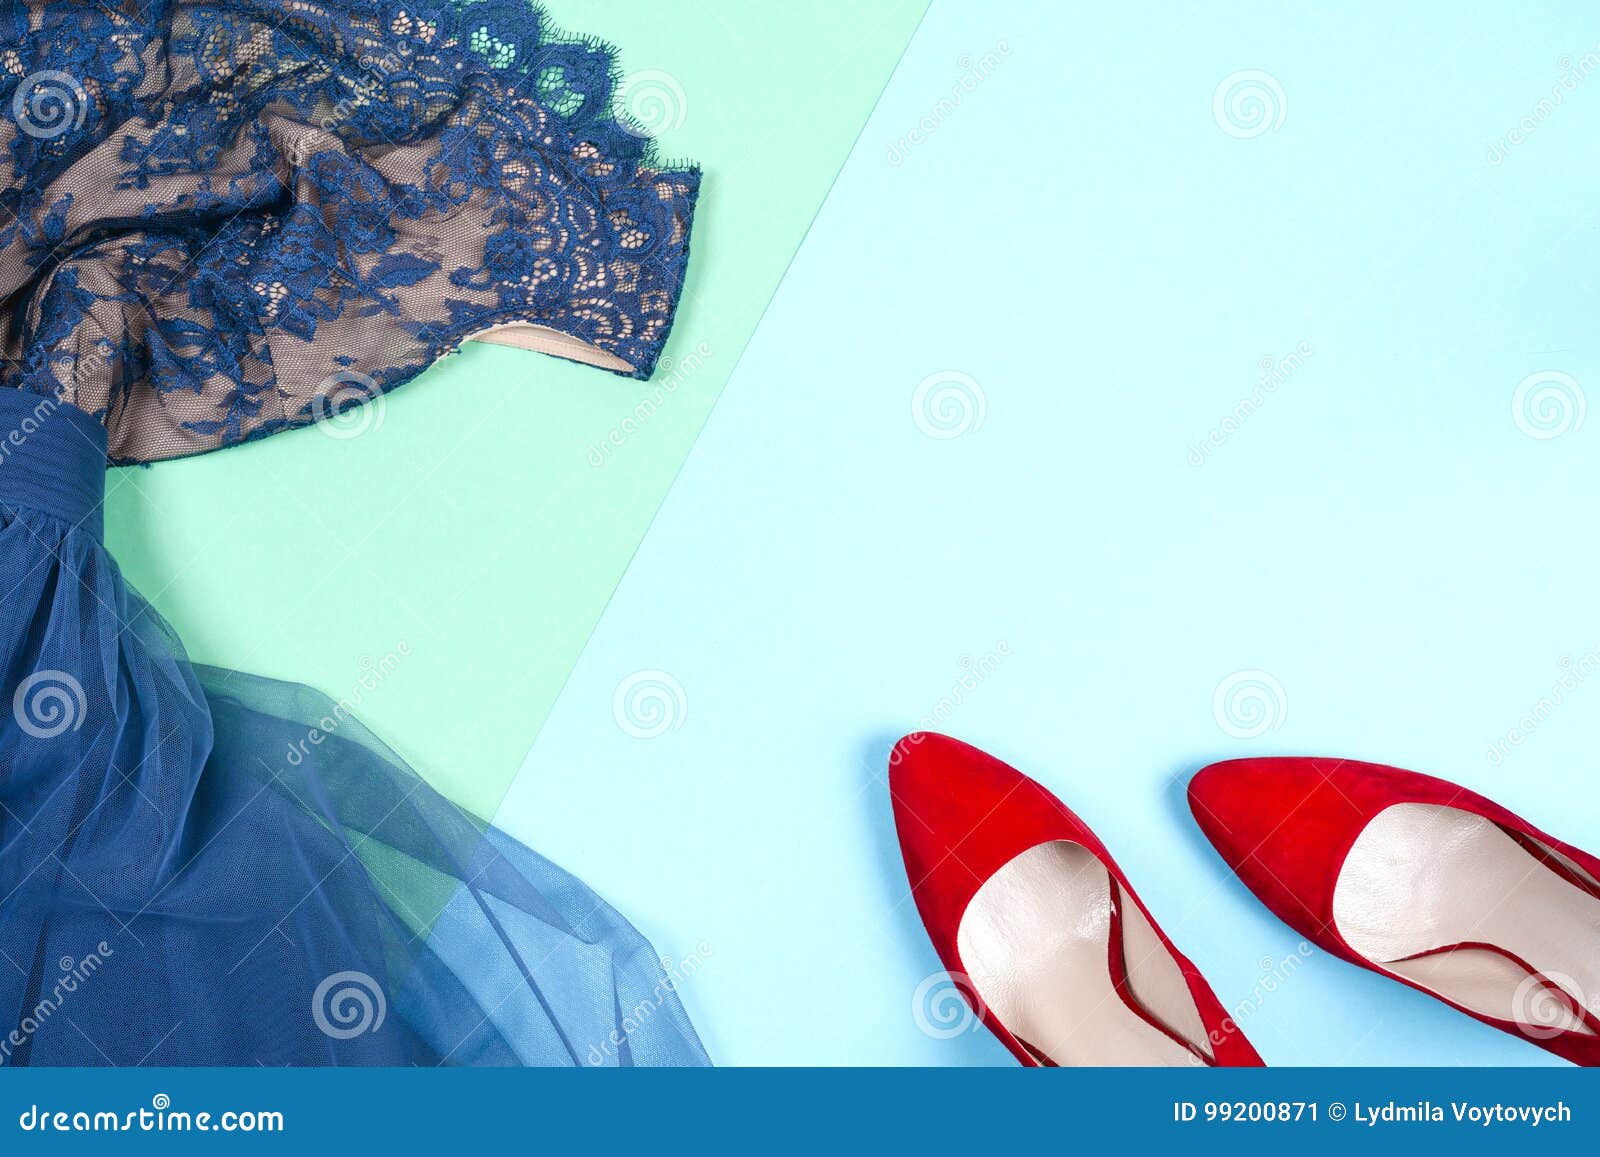 Fashion. Clothes Accessories Fashion Set Stock Image - Image of ...